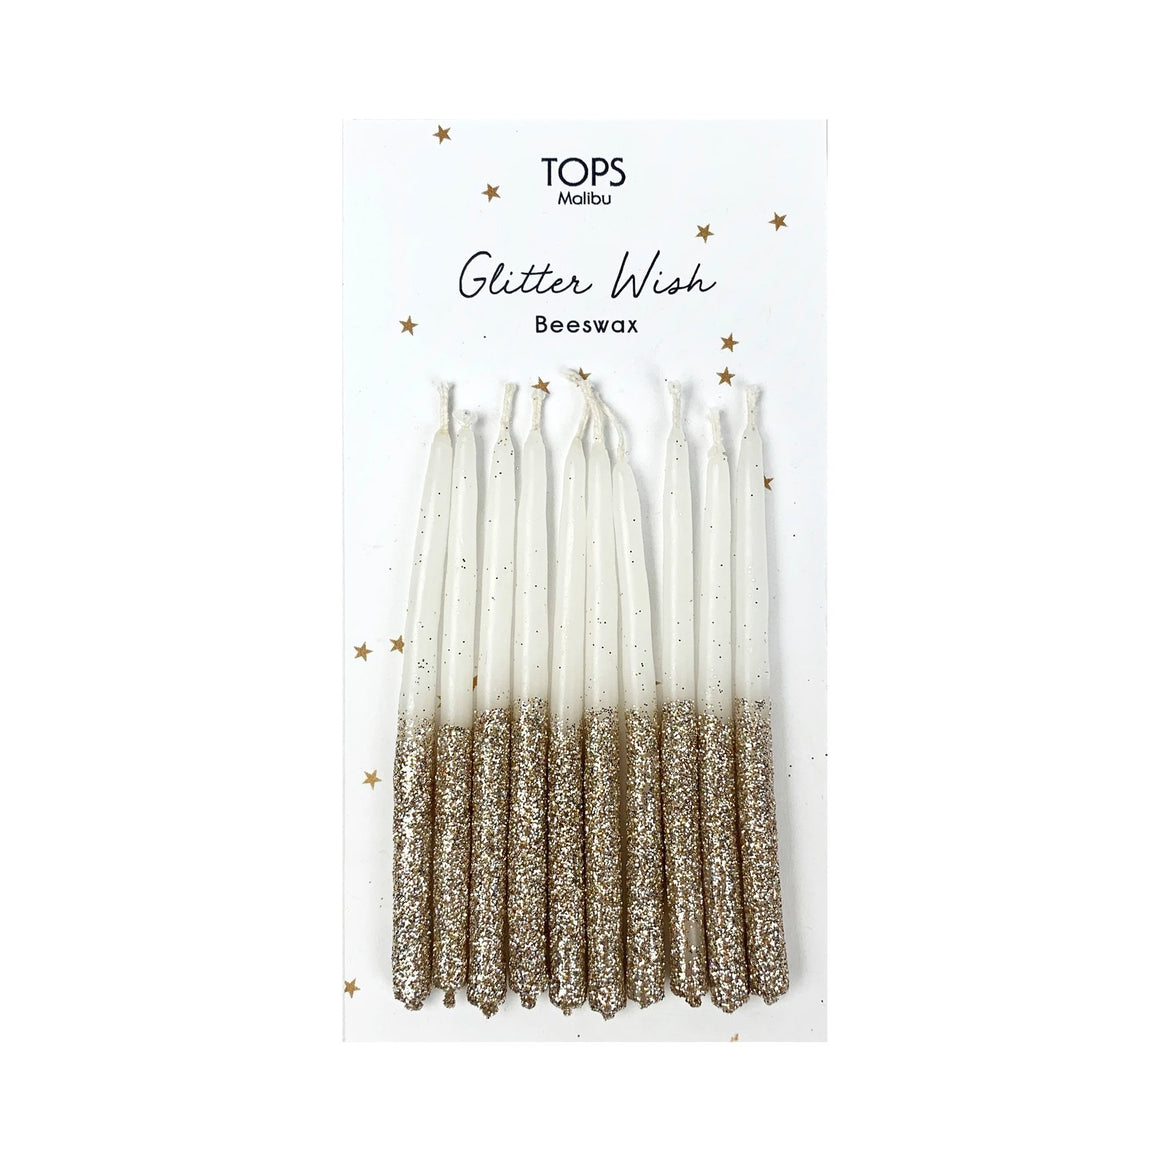 CANDLES - GLITTER DIPPED BEESWAX WISH CANDLES GOLD